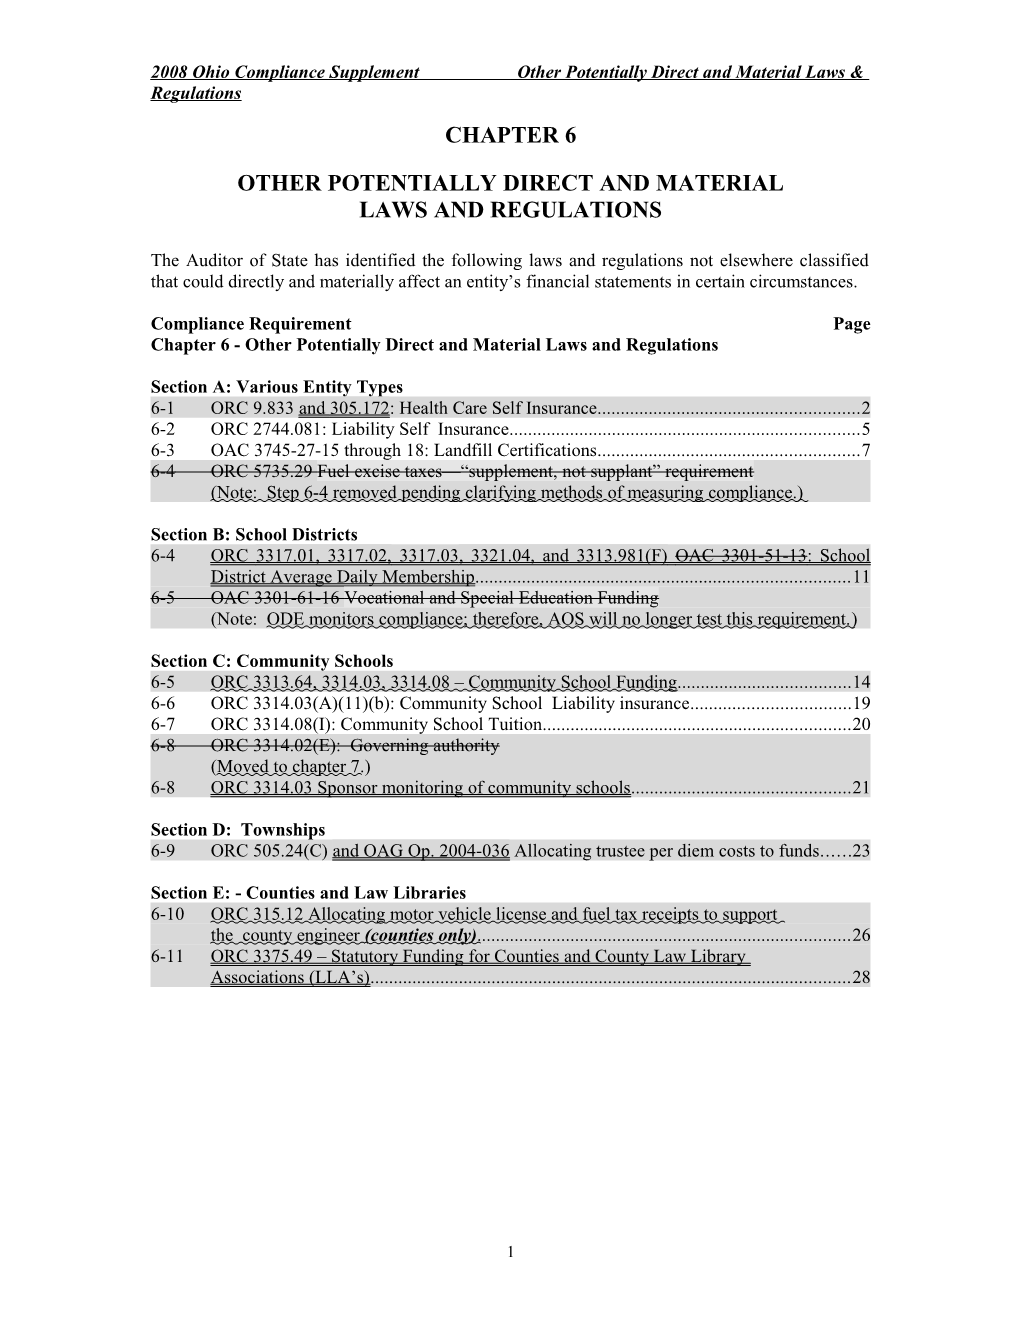 2008Ohio Compliance Supplement Other Potentially Direct and Material Laws & Regulations